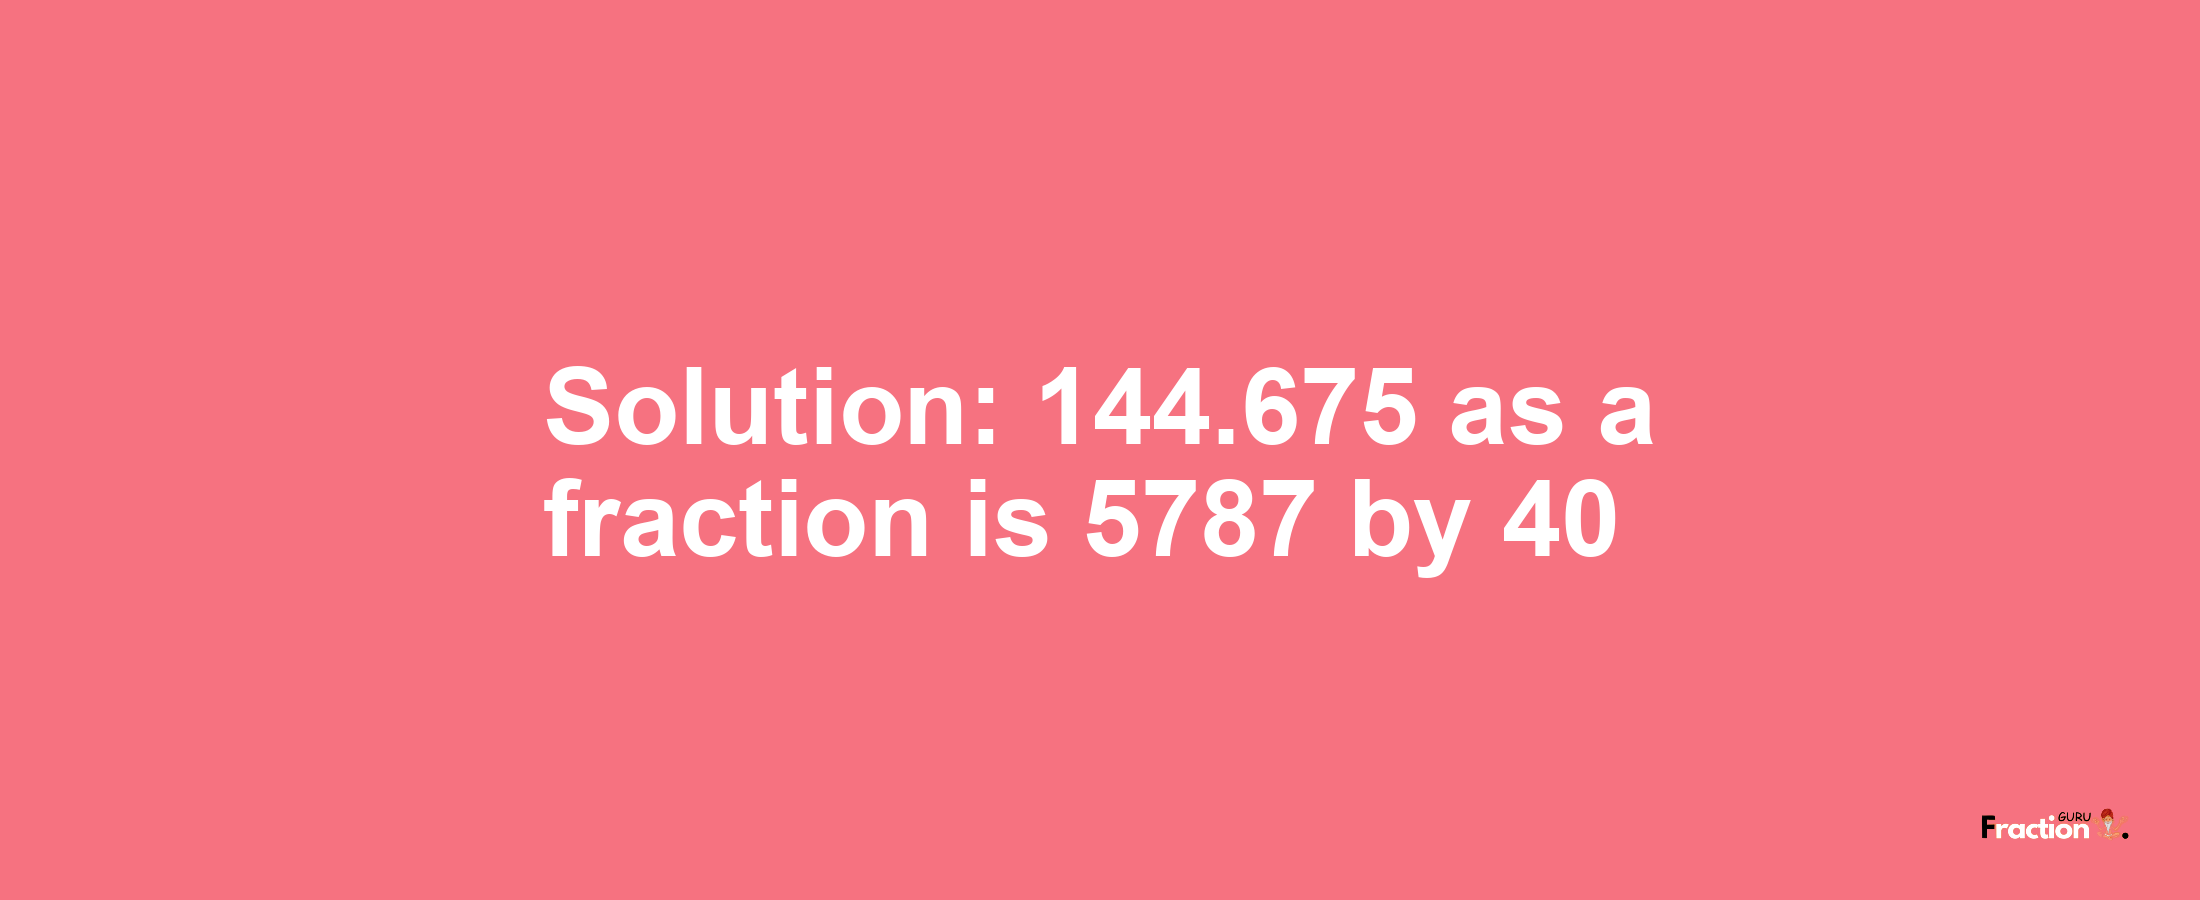 Solution:144.675 as a fraction is 5787/40